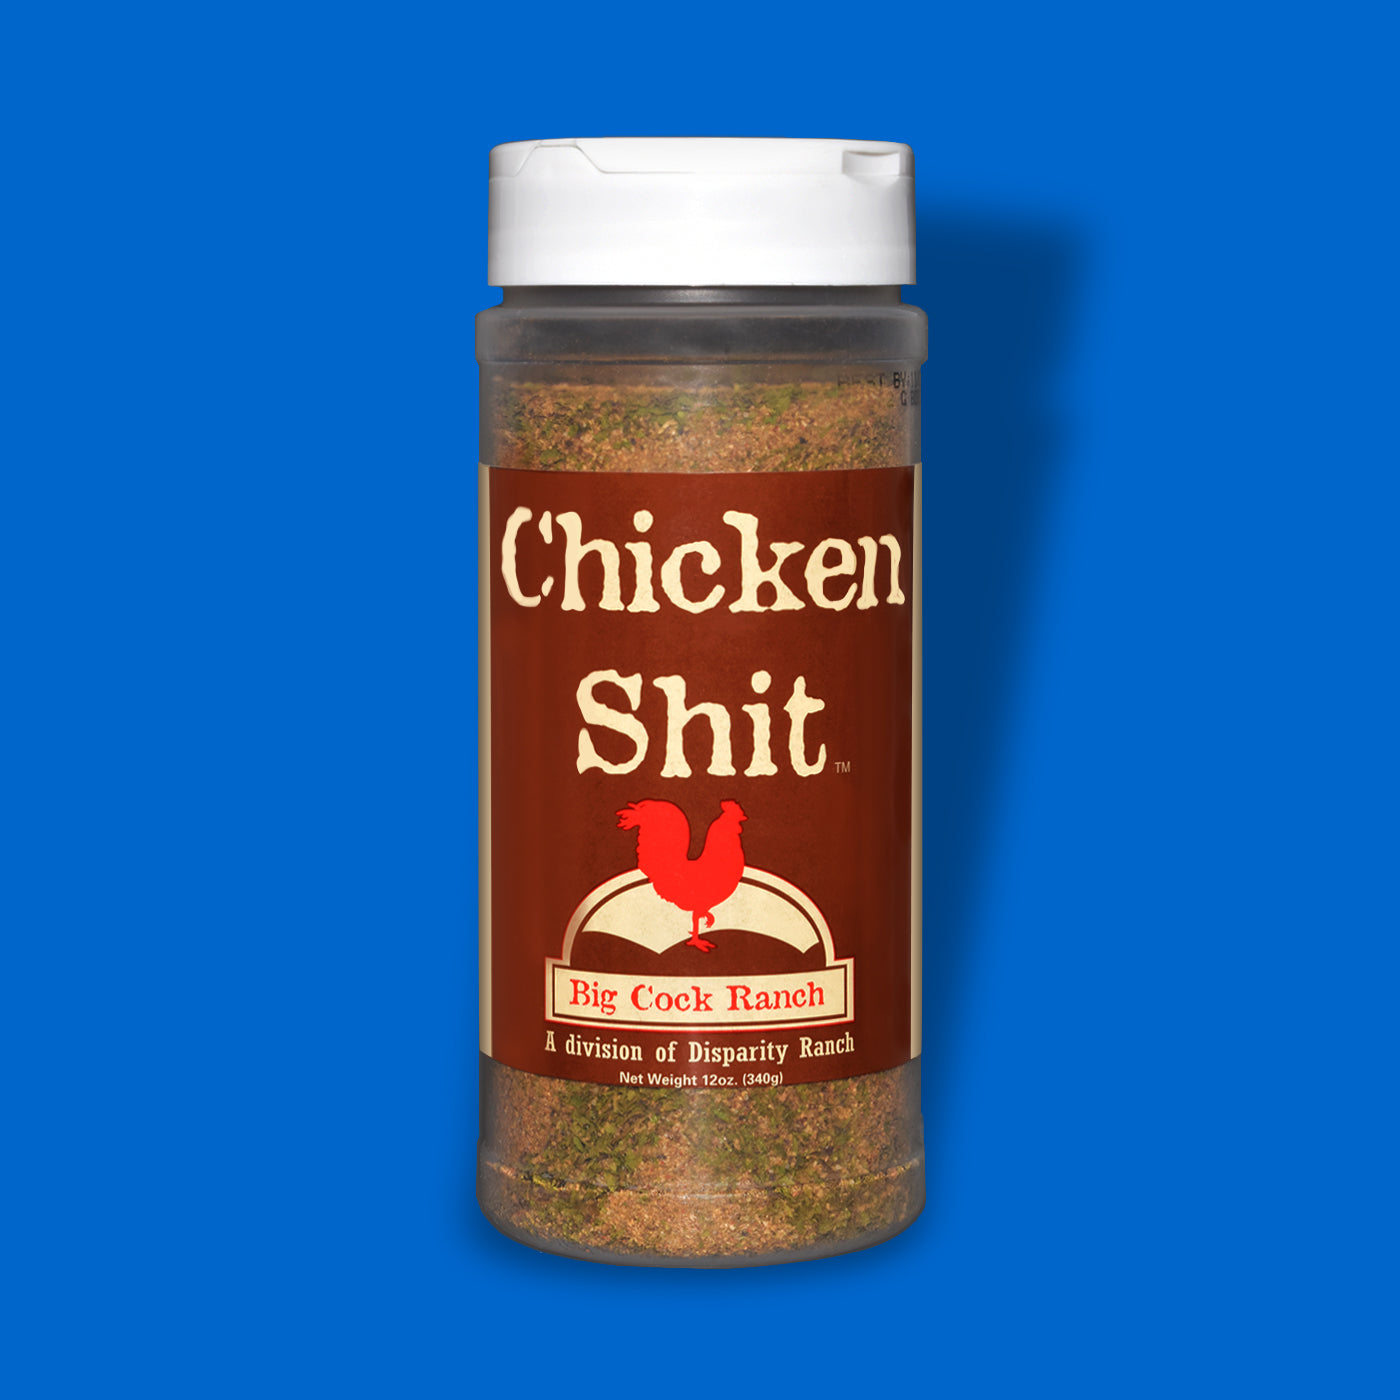 Special Shit: Chicken Shit